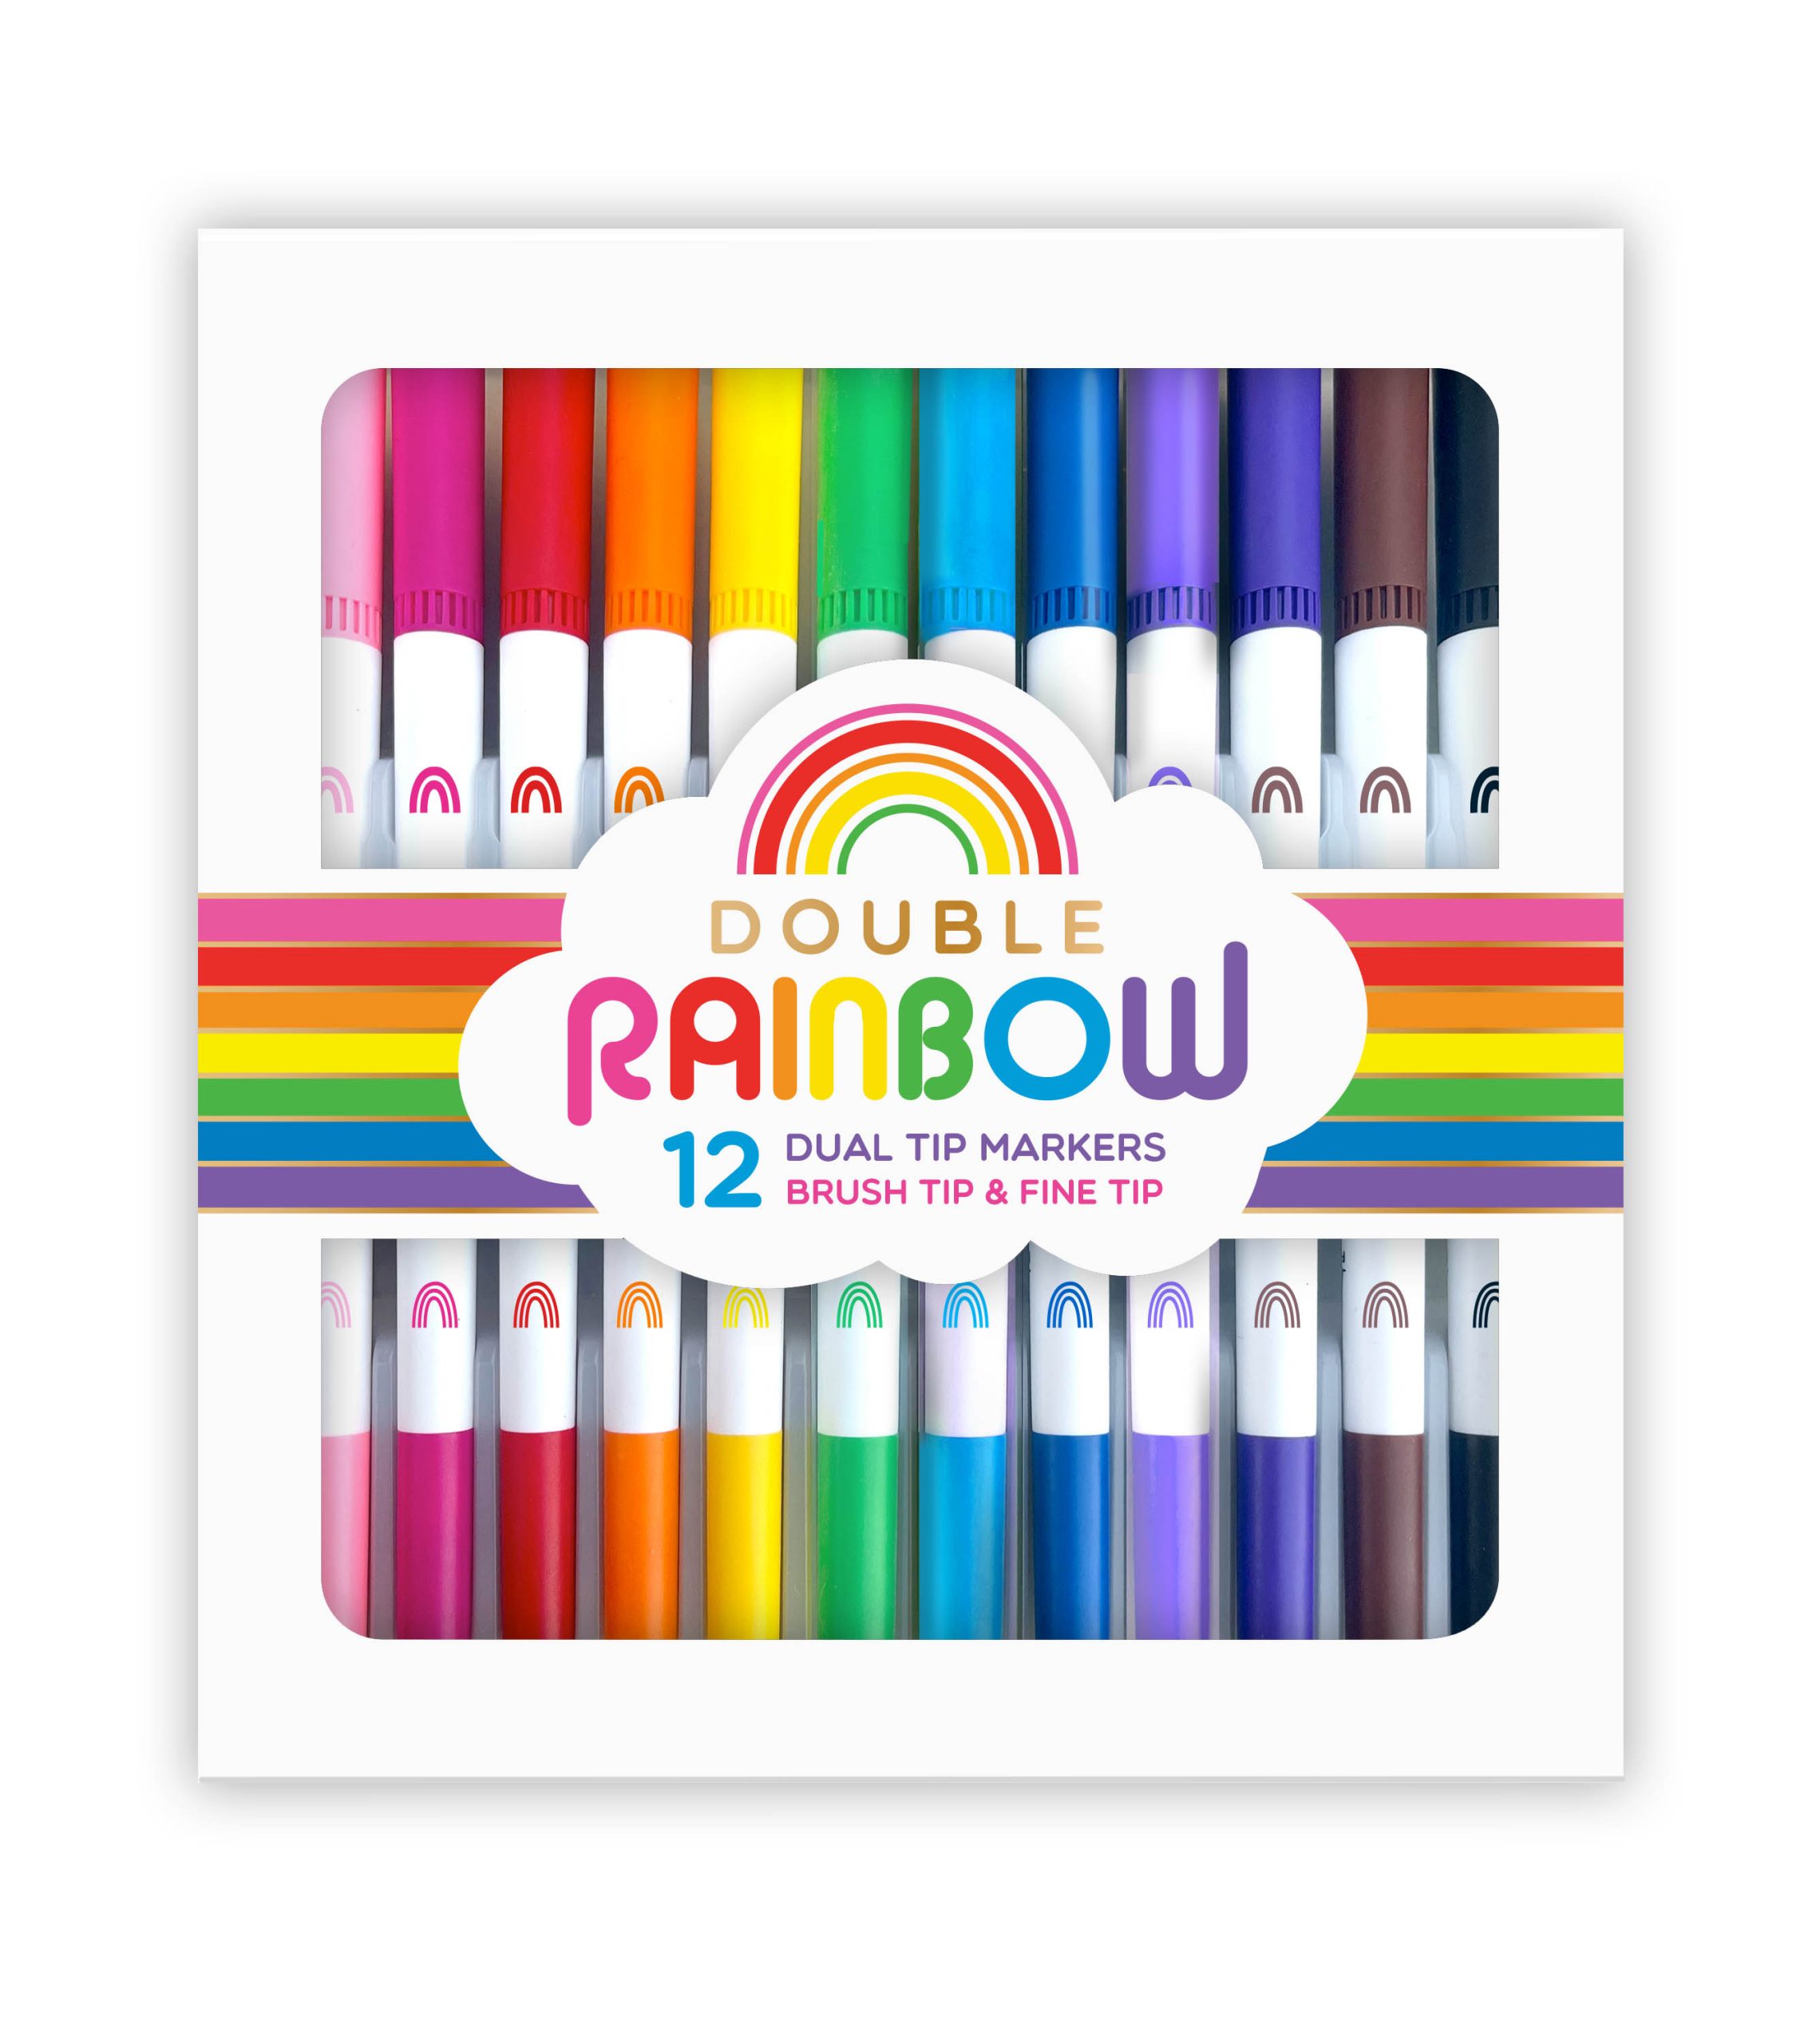 https://sniftypen.com/wp-content/uploads/2022/09/Rainbow_Markers_w-scaled.jpg